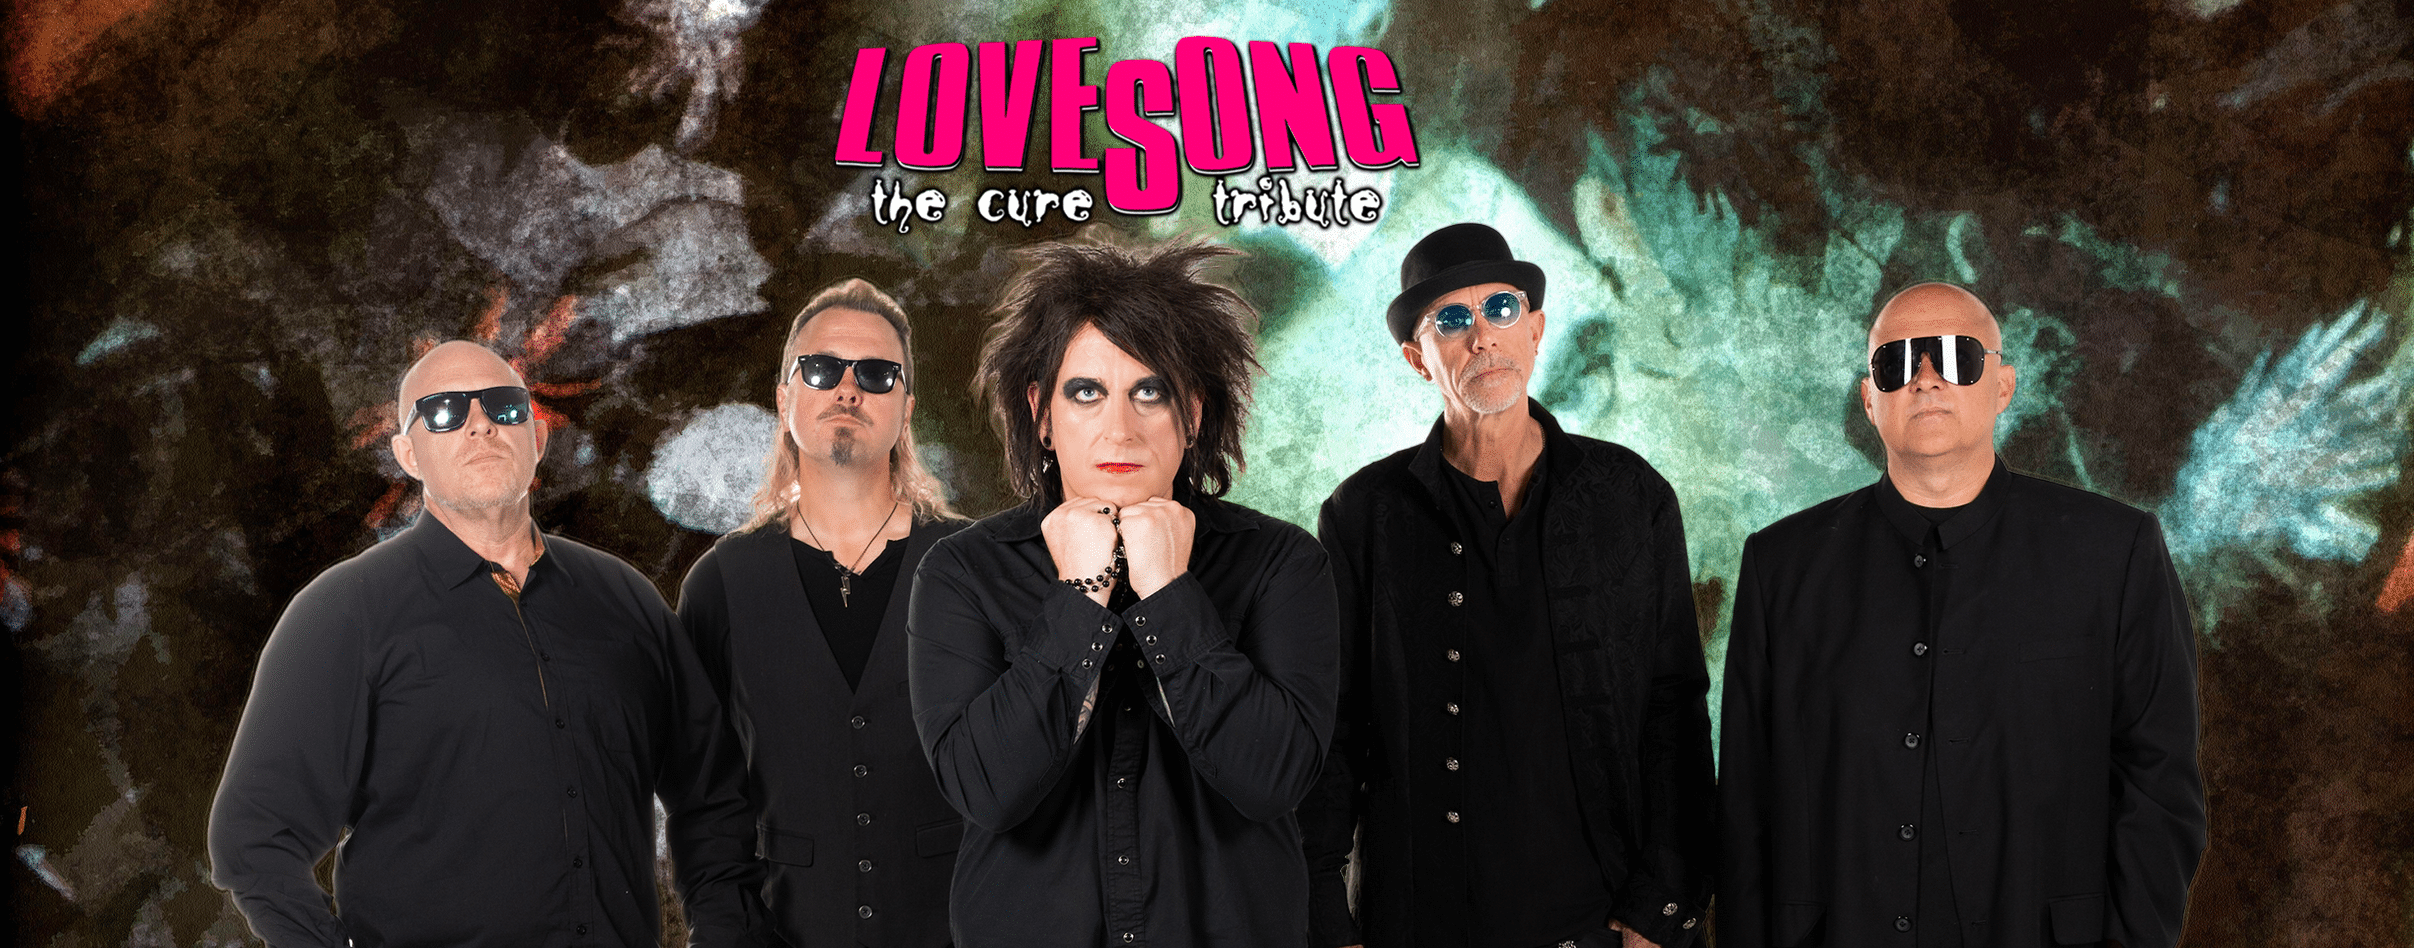 LOVESONG - A Tribute to The Cure